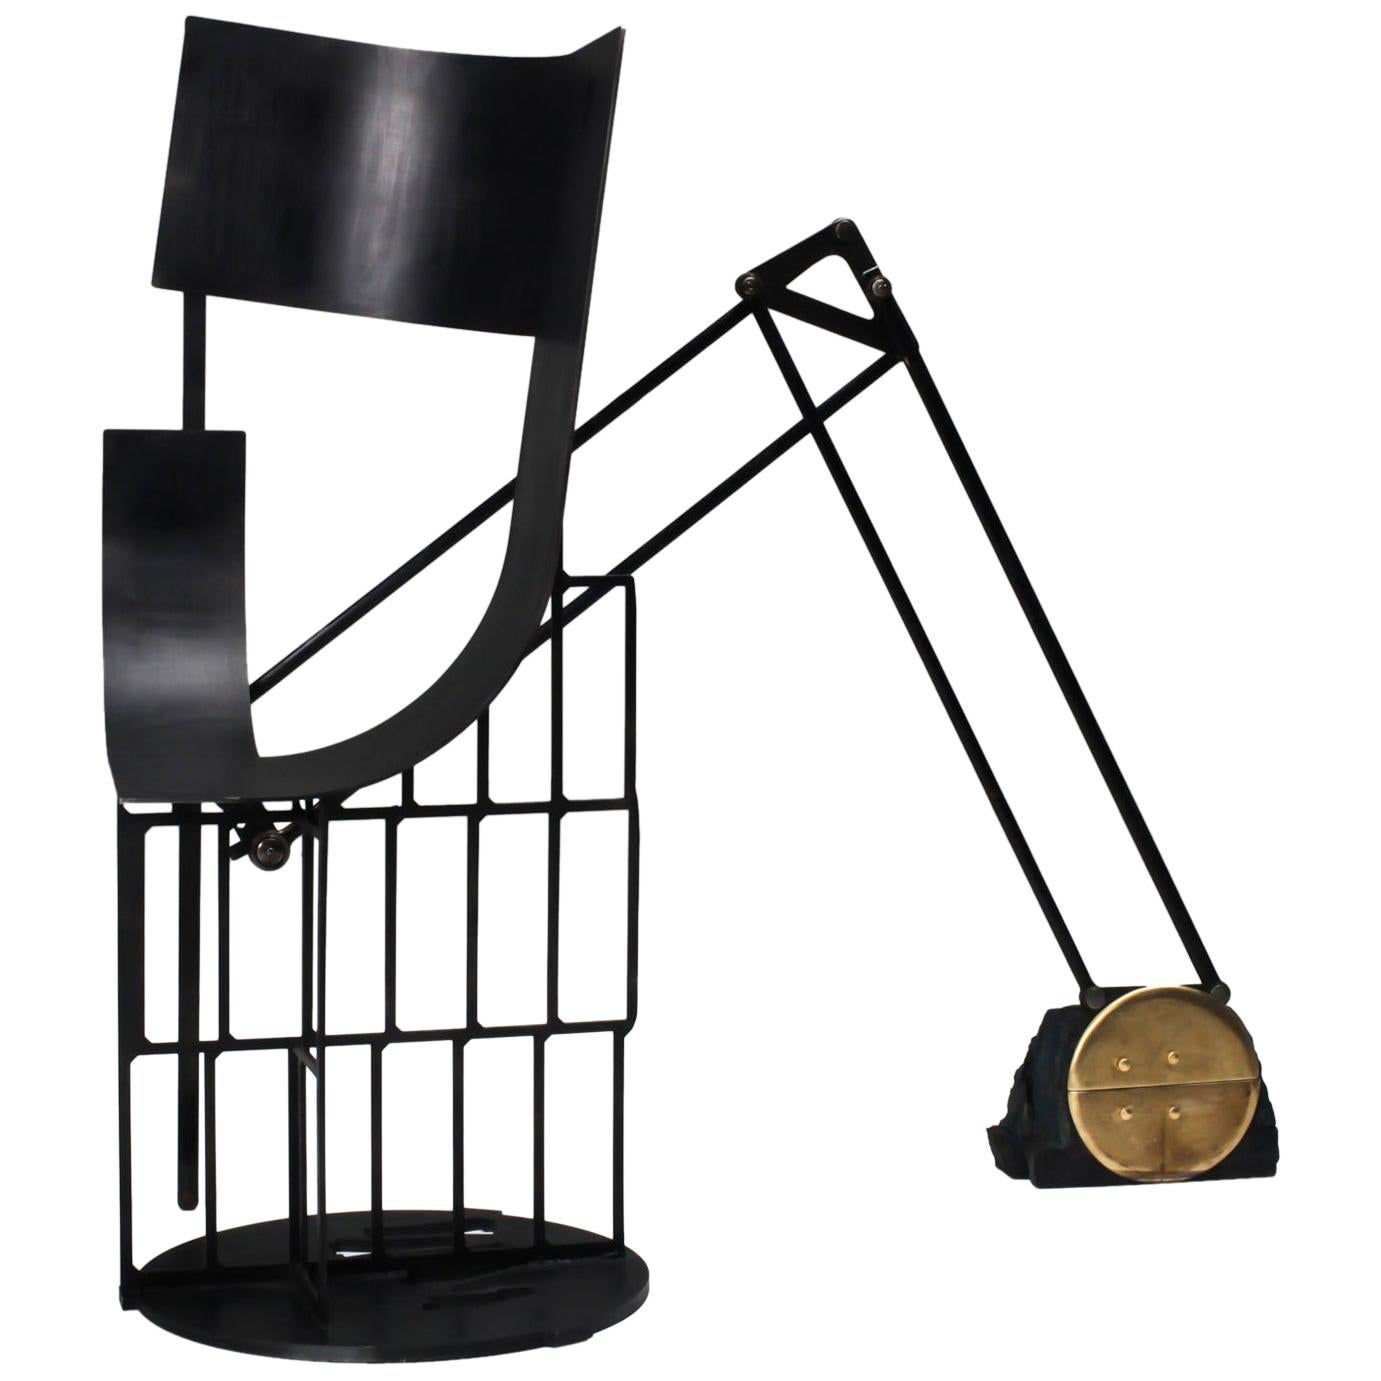 Functional art Throne / Chair "Black Caterpillar" by Lionel Jadot, 2020 For Sale